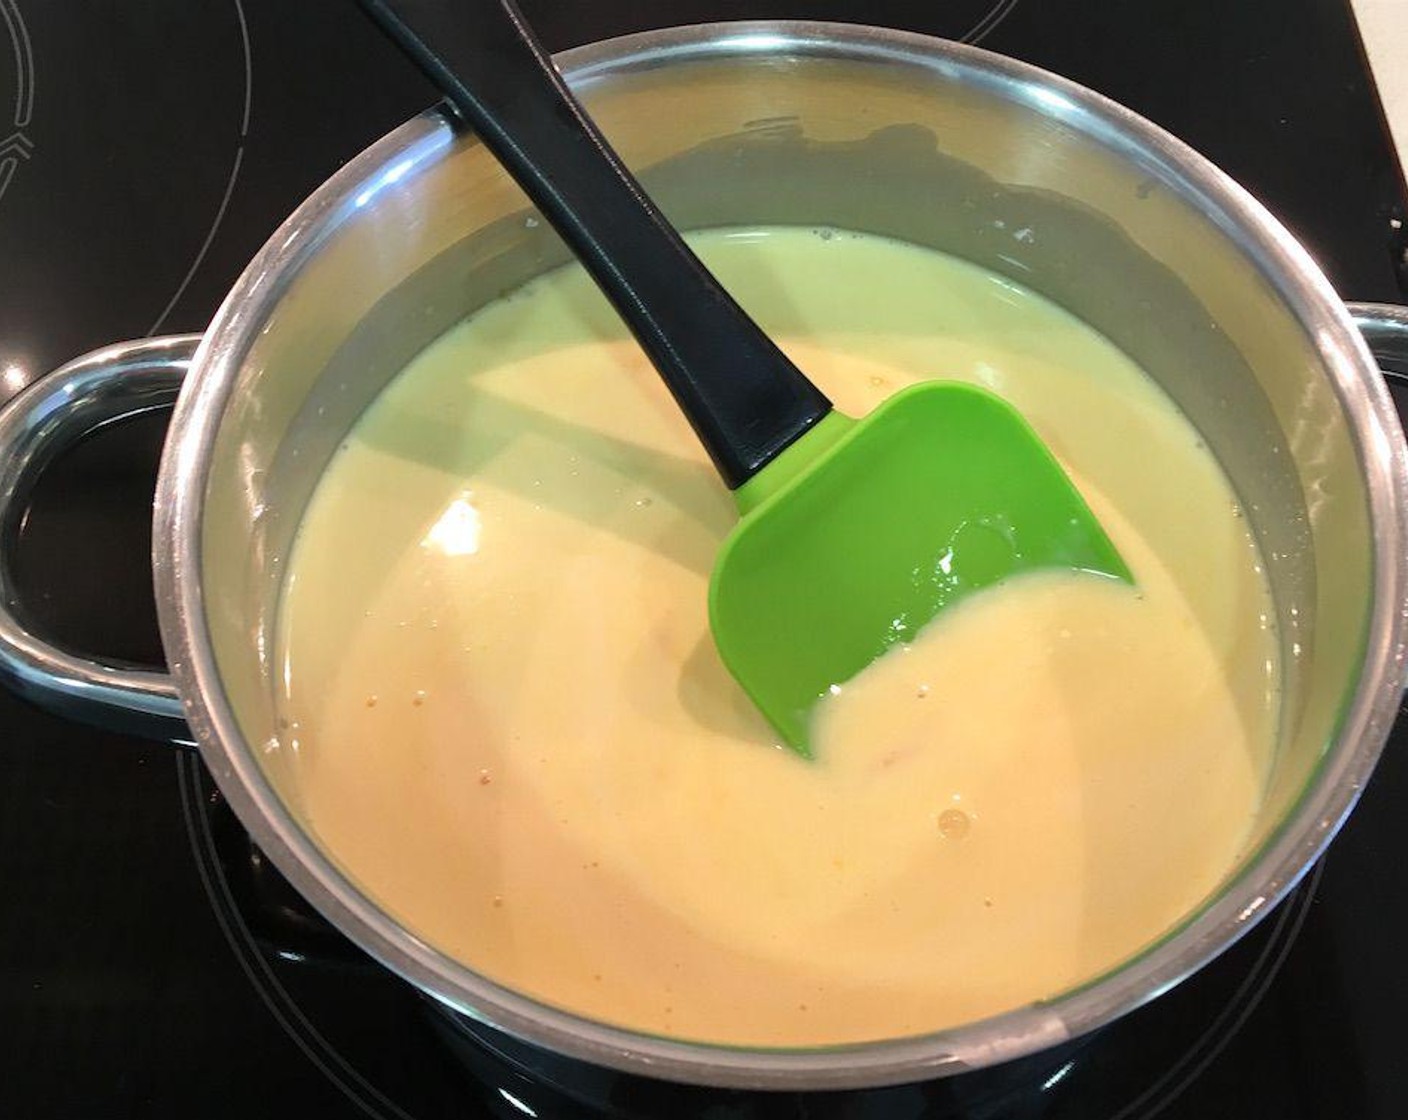 step 6 Combine egg yolks in a small sauce pan with the Granulated Sugar (3/4 cup) and Heavy Cream (1 cup). Cook slowly over low heat while constantly stirring until thick enough to coat the back of the spoon, about 10 to 15 minutes.